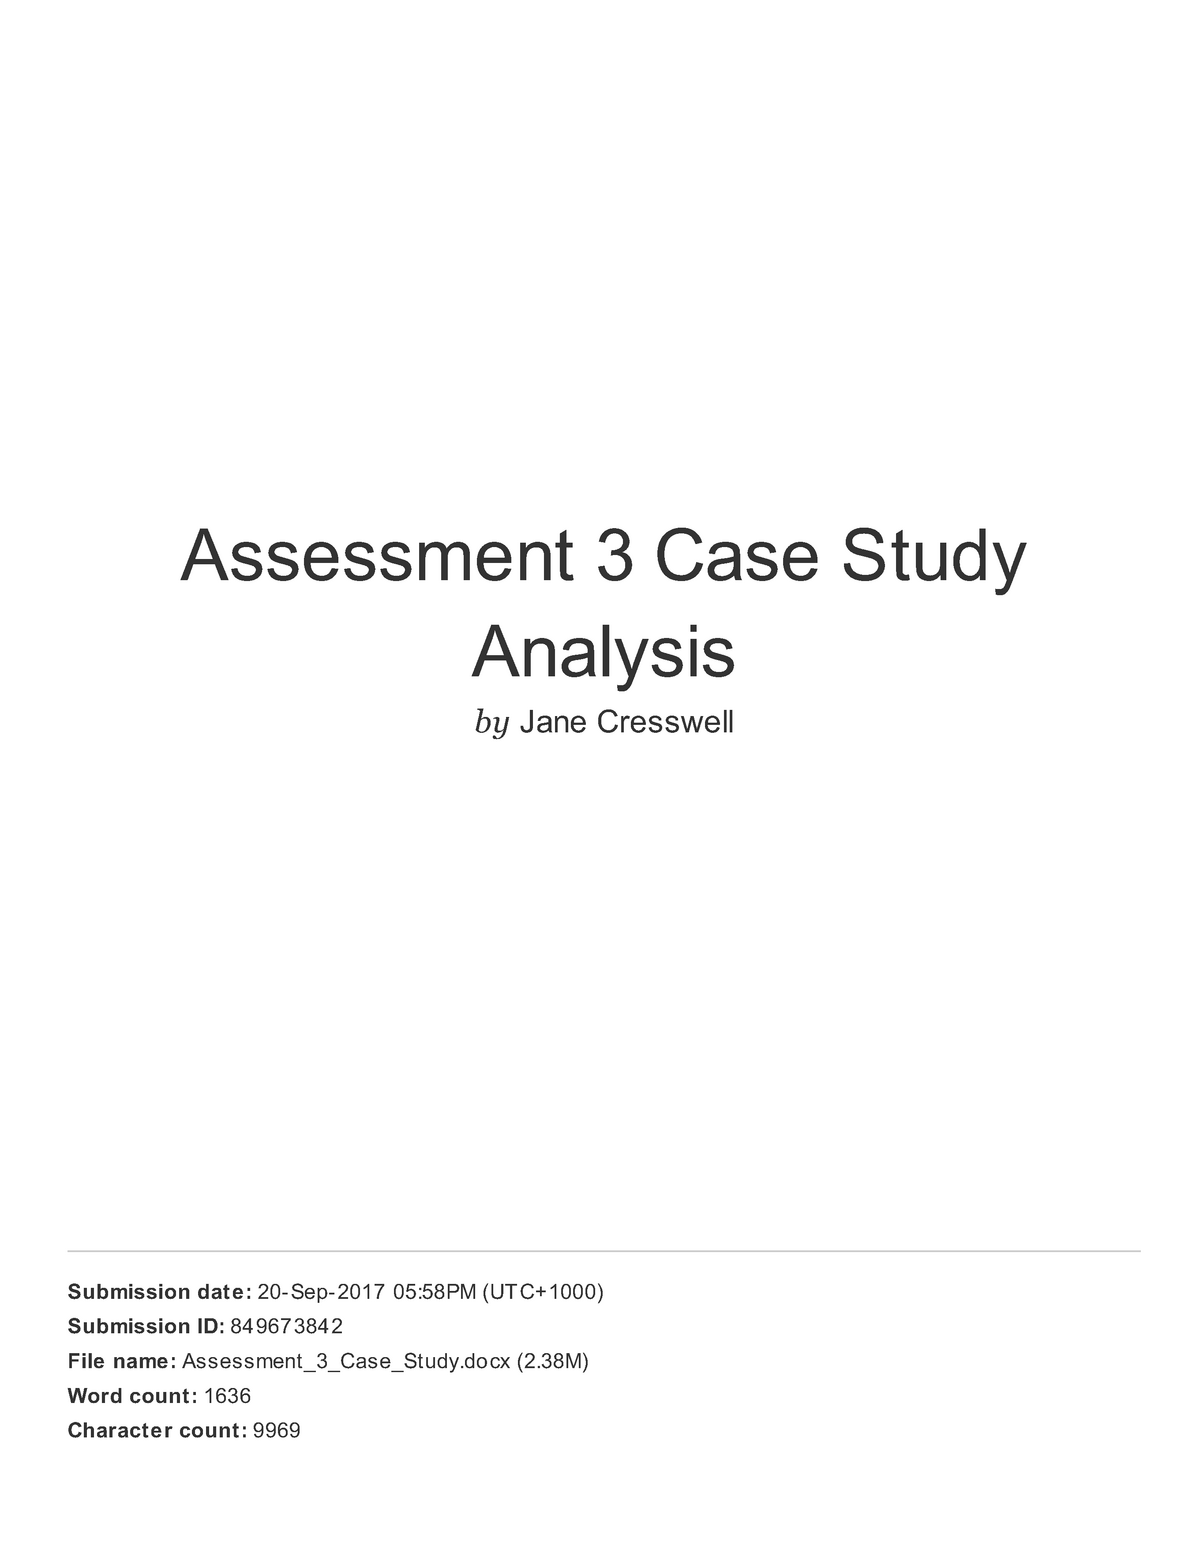 law firm case study assessment